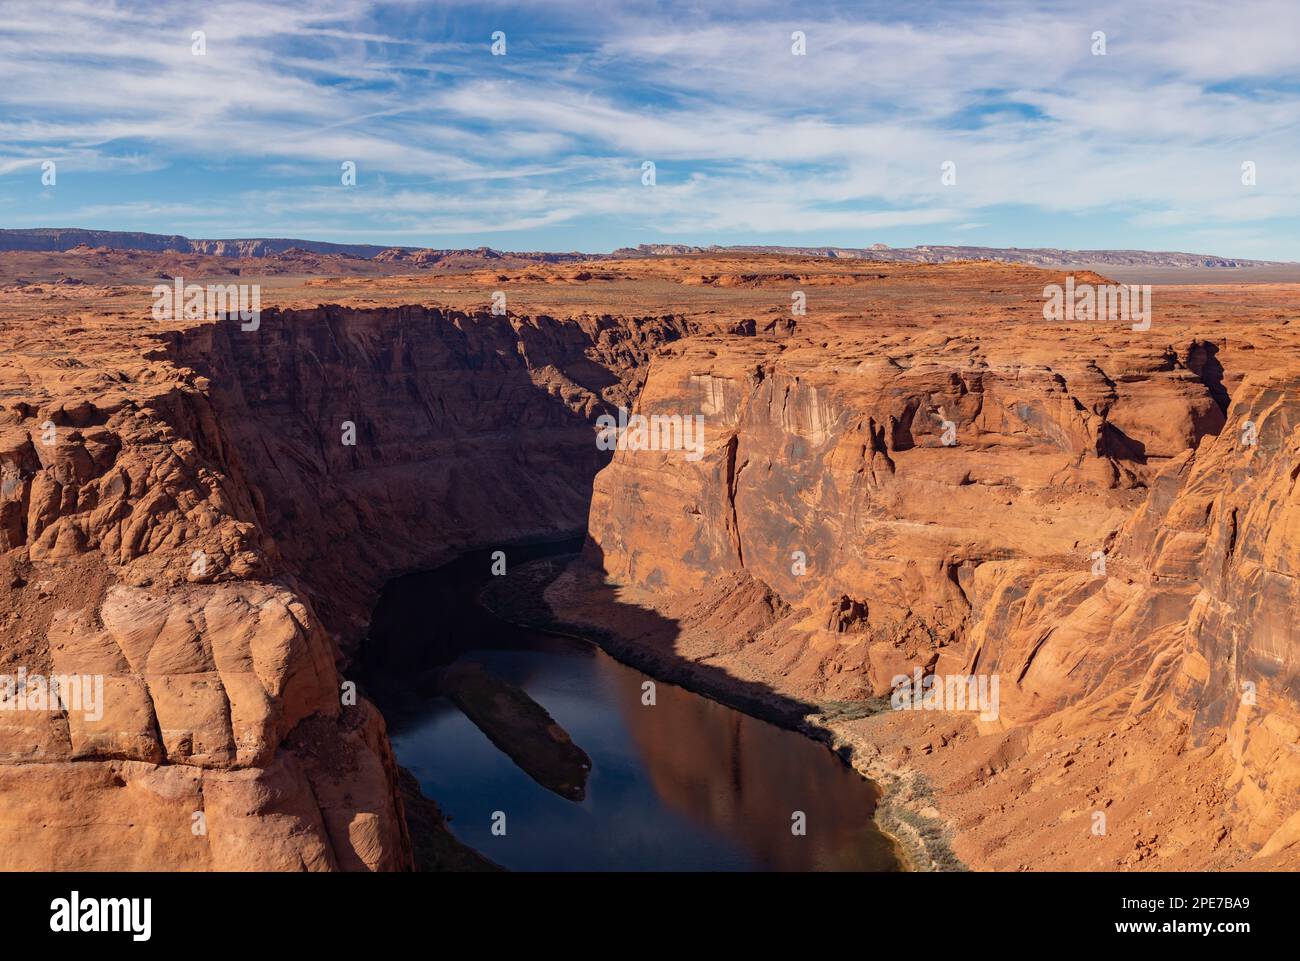 A picture of the Colorado River and the Grand Canyon landscape around next to the Horseshoe Bend. Stock Photo